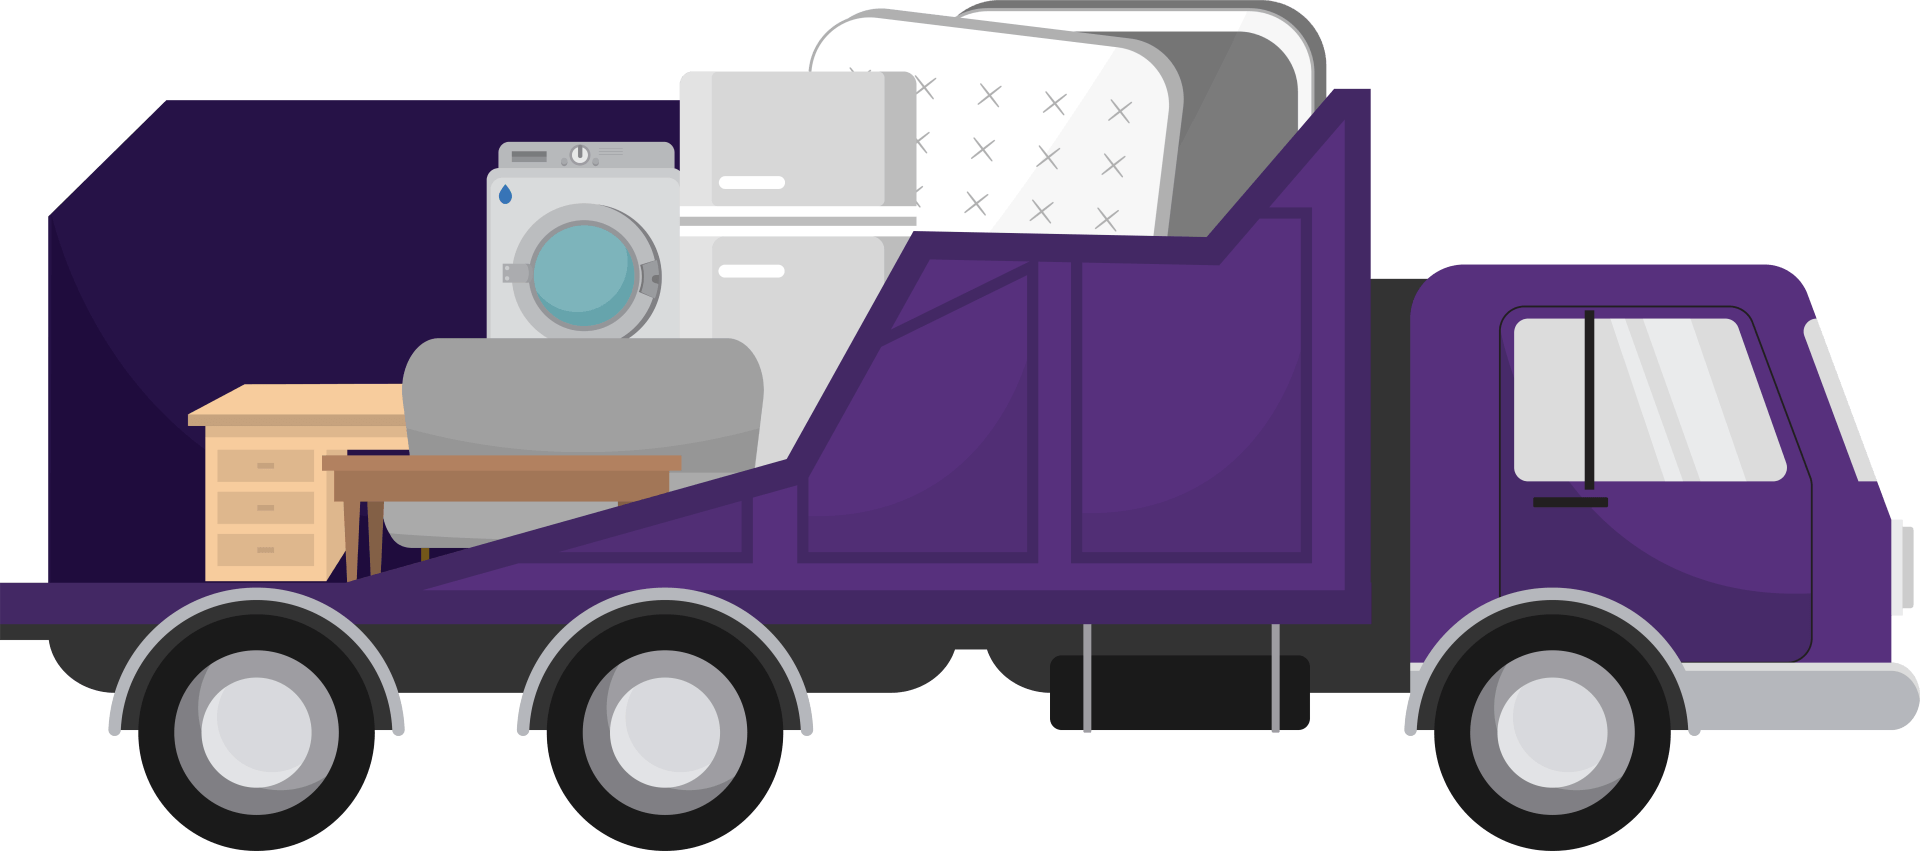 purple large junk removal truck icon